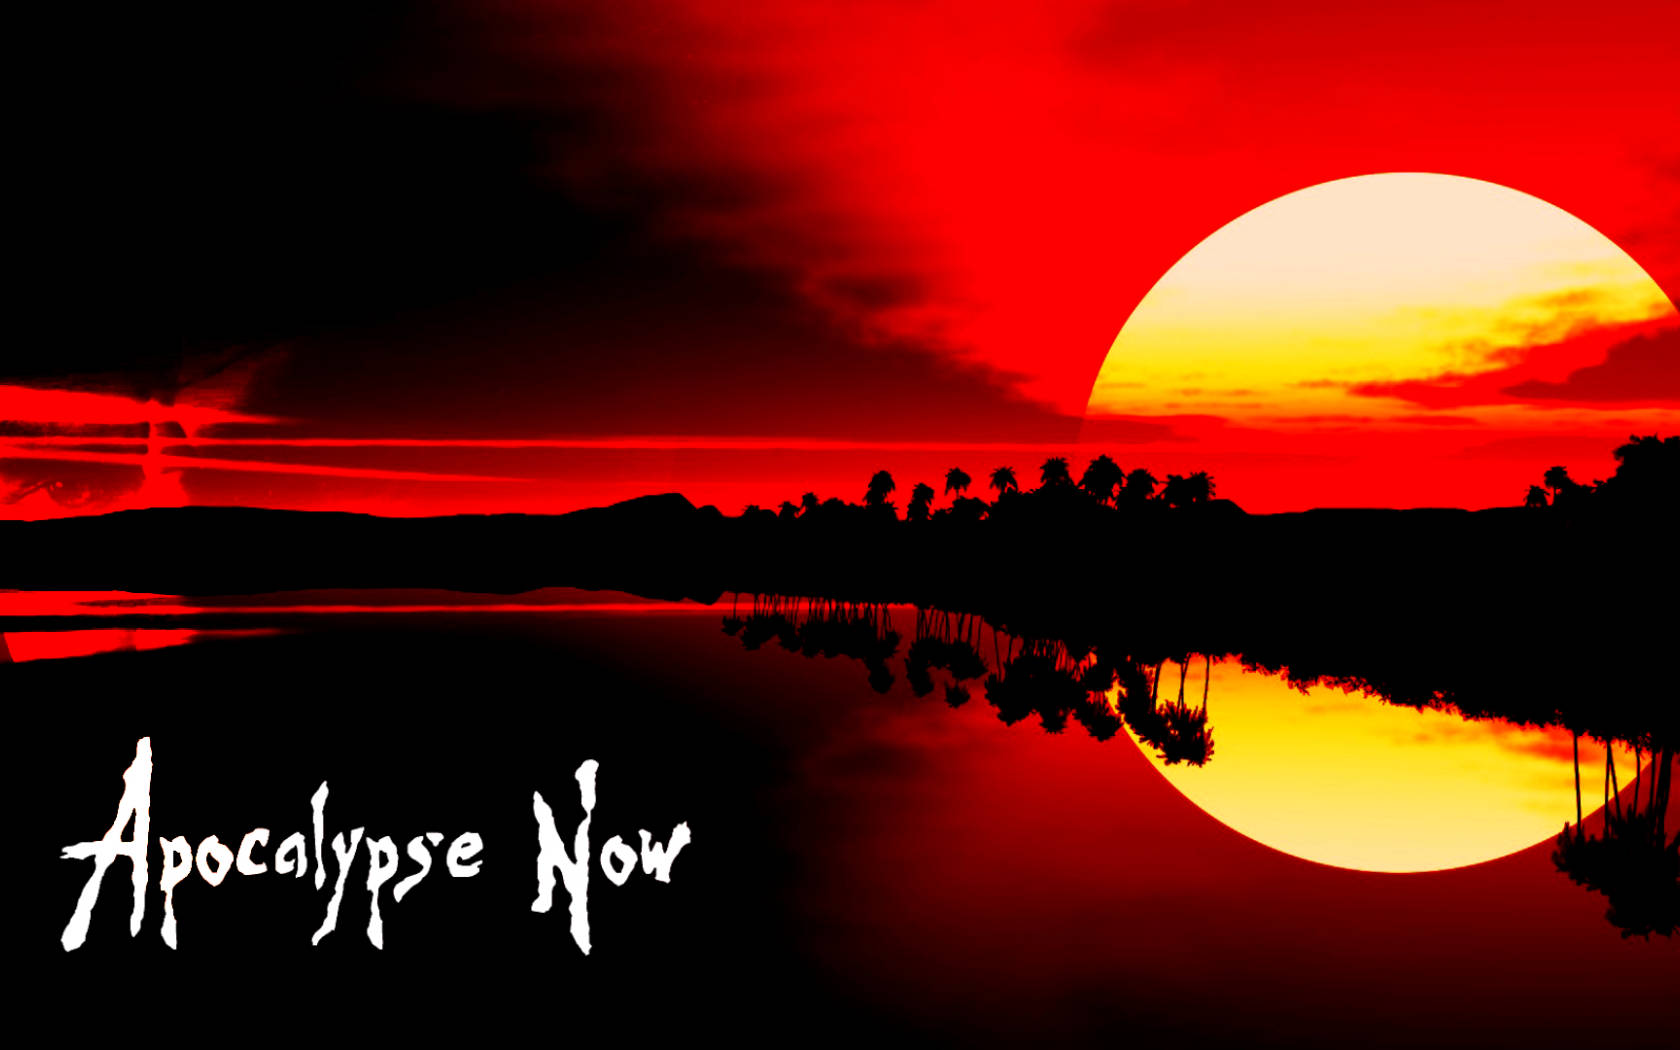 Apocalpyse Now Sunset Silhouette Wallpaper